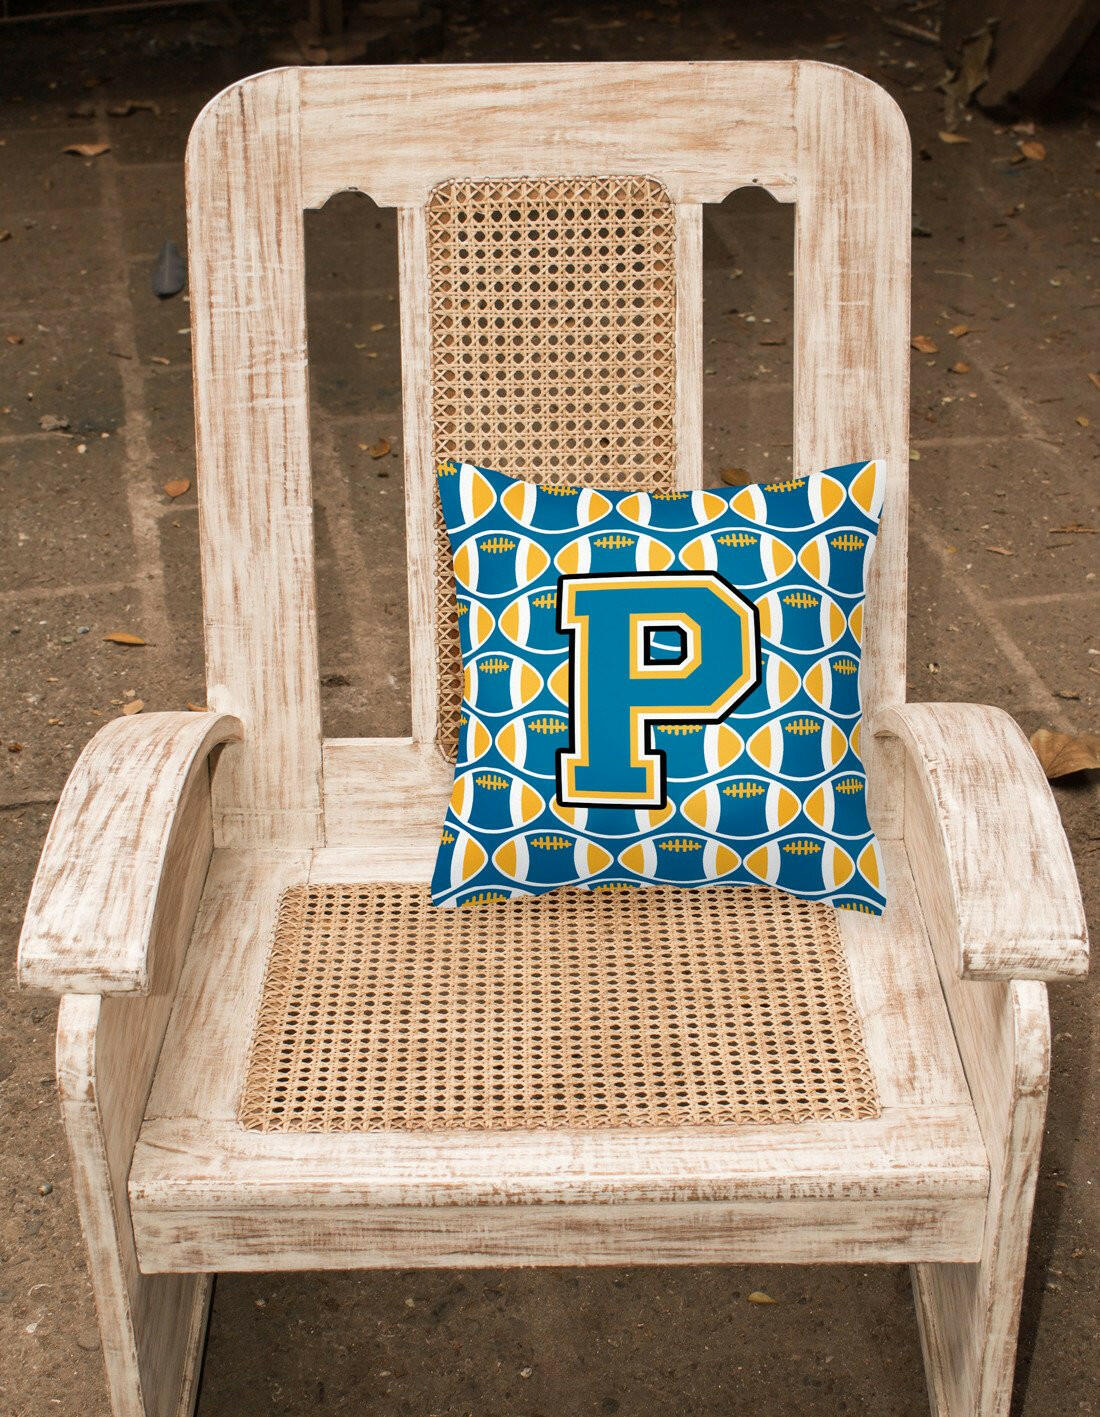 Letter P Football Blue and Gold Fabric Decorative Pillow CJ1077-PPW1414 by Caroline's Treasures